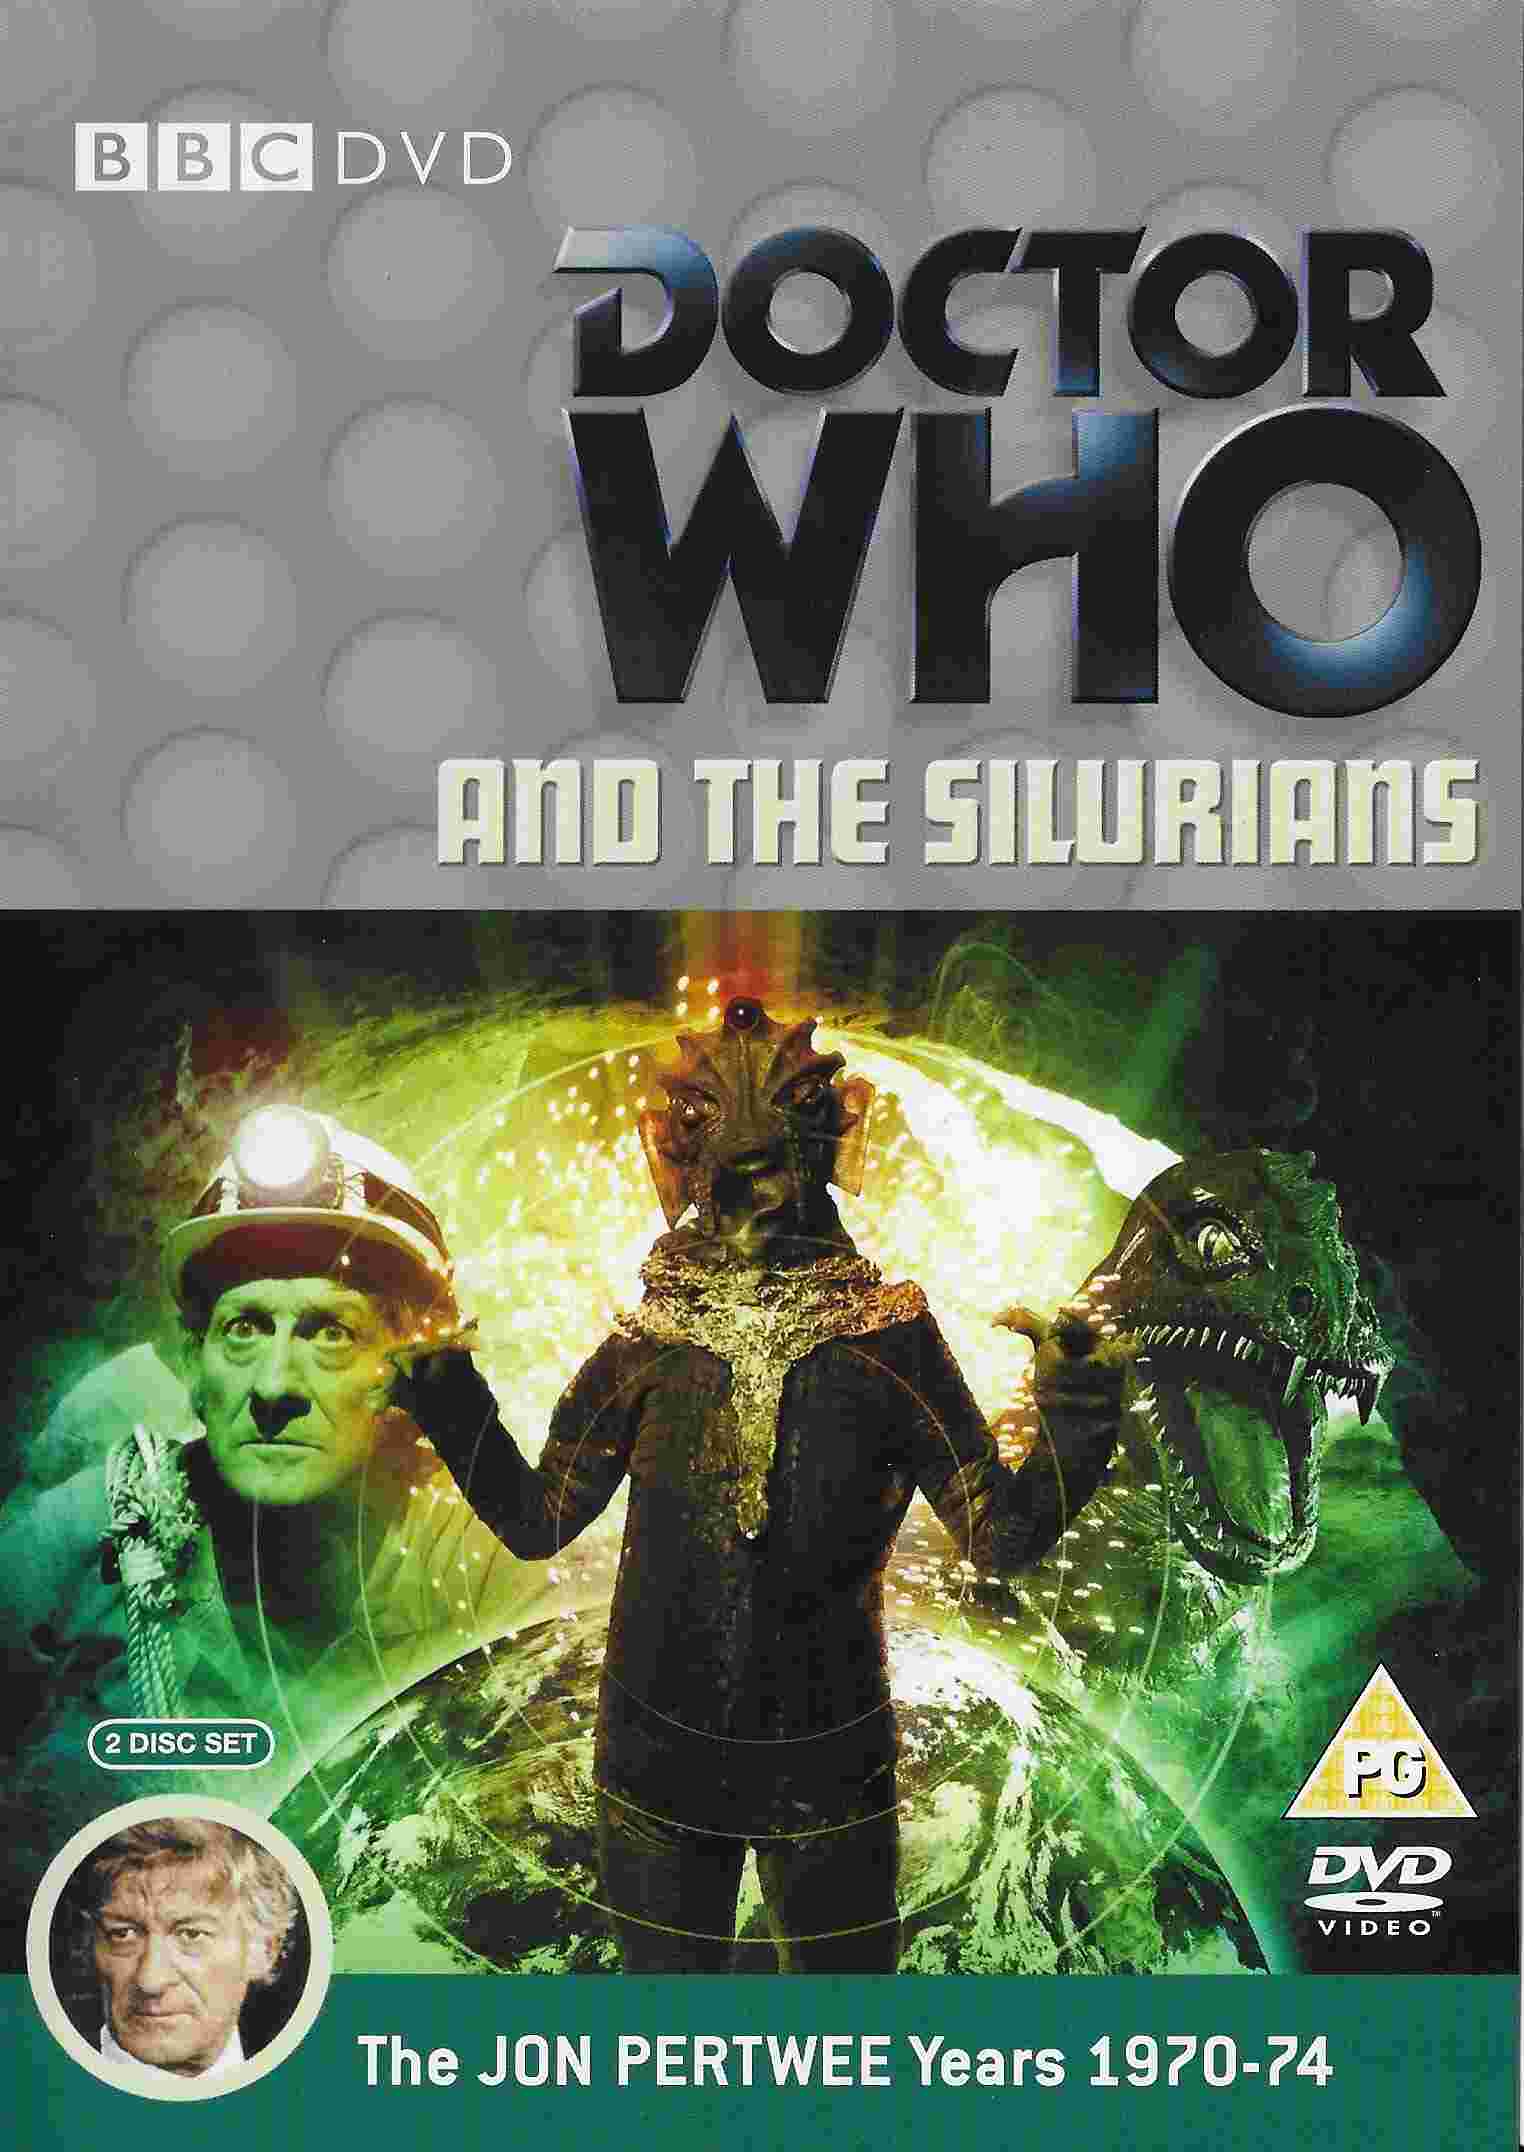 Picture of BBCDVD 2438A Doctor Who - The Silurians by artist Malcolm Hulke from the BBC records and Tapes library